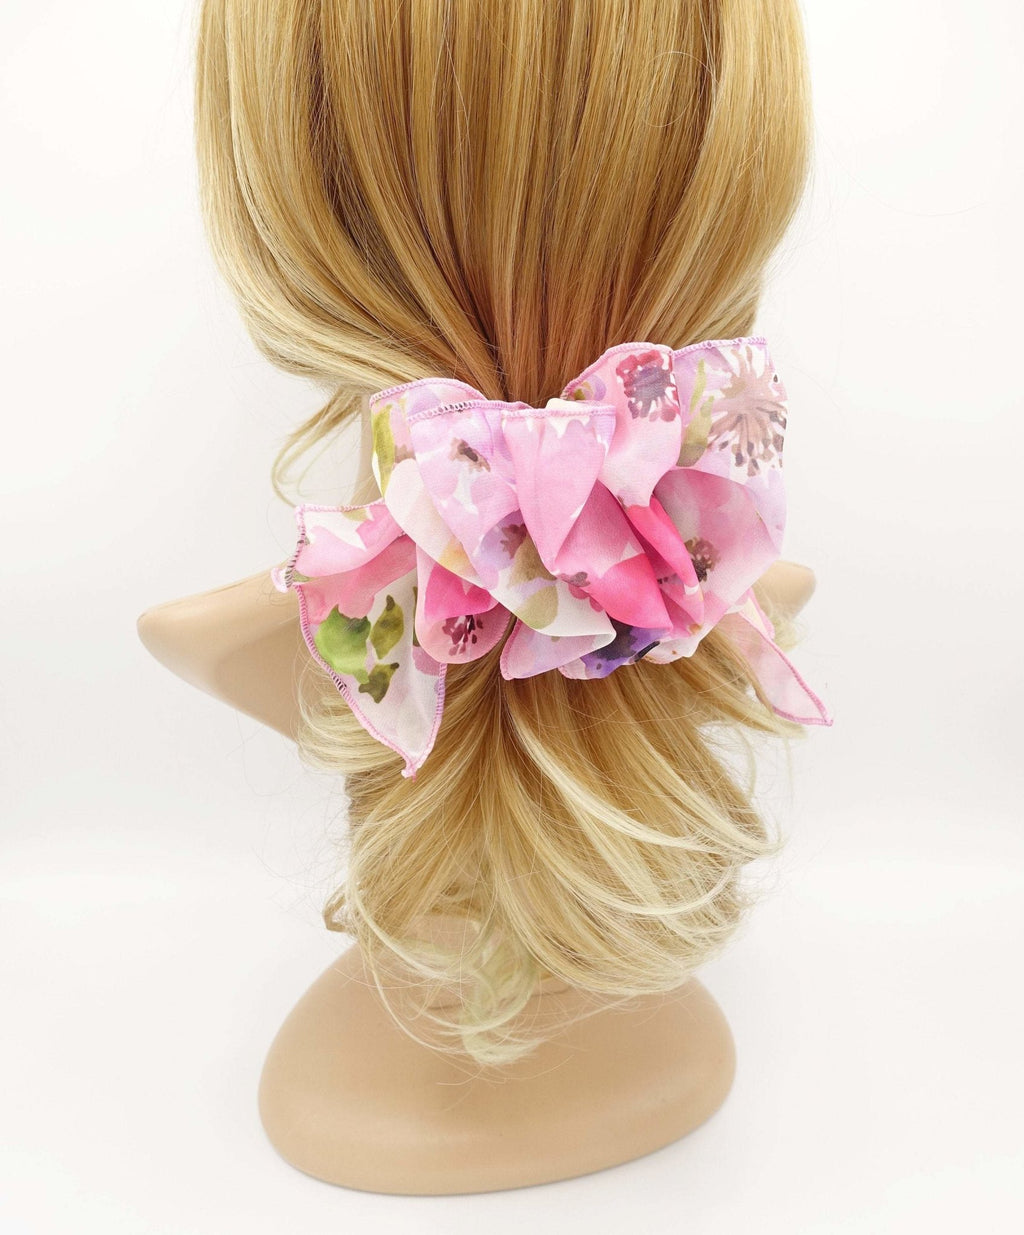 VeryShine Barrettes & Clips Pink gradation floral print ruffle wave french hair barrette women hair accessory